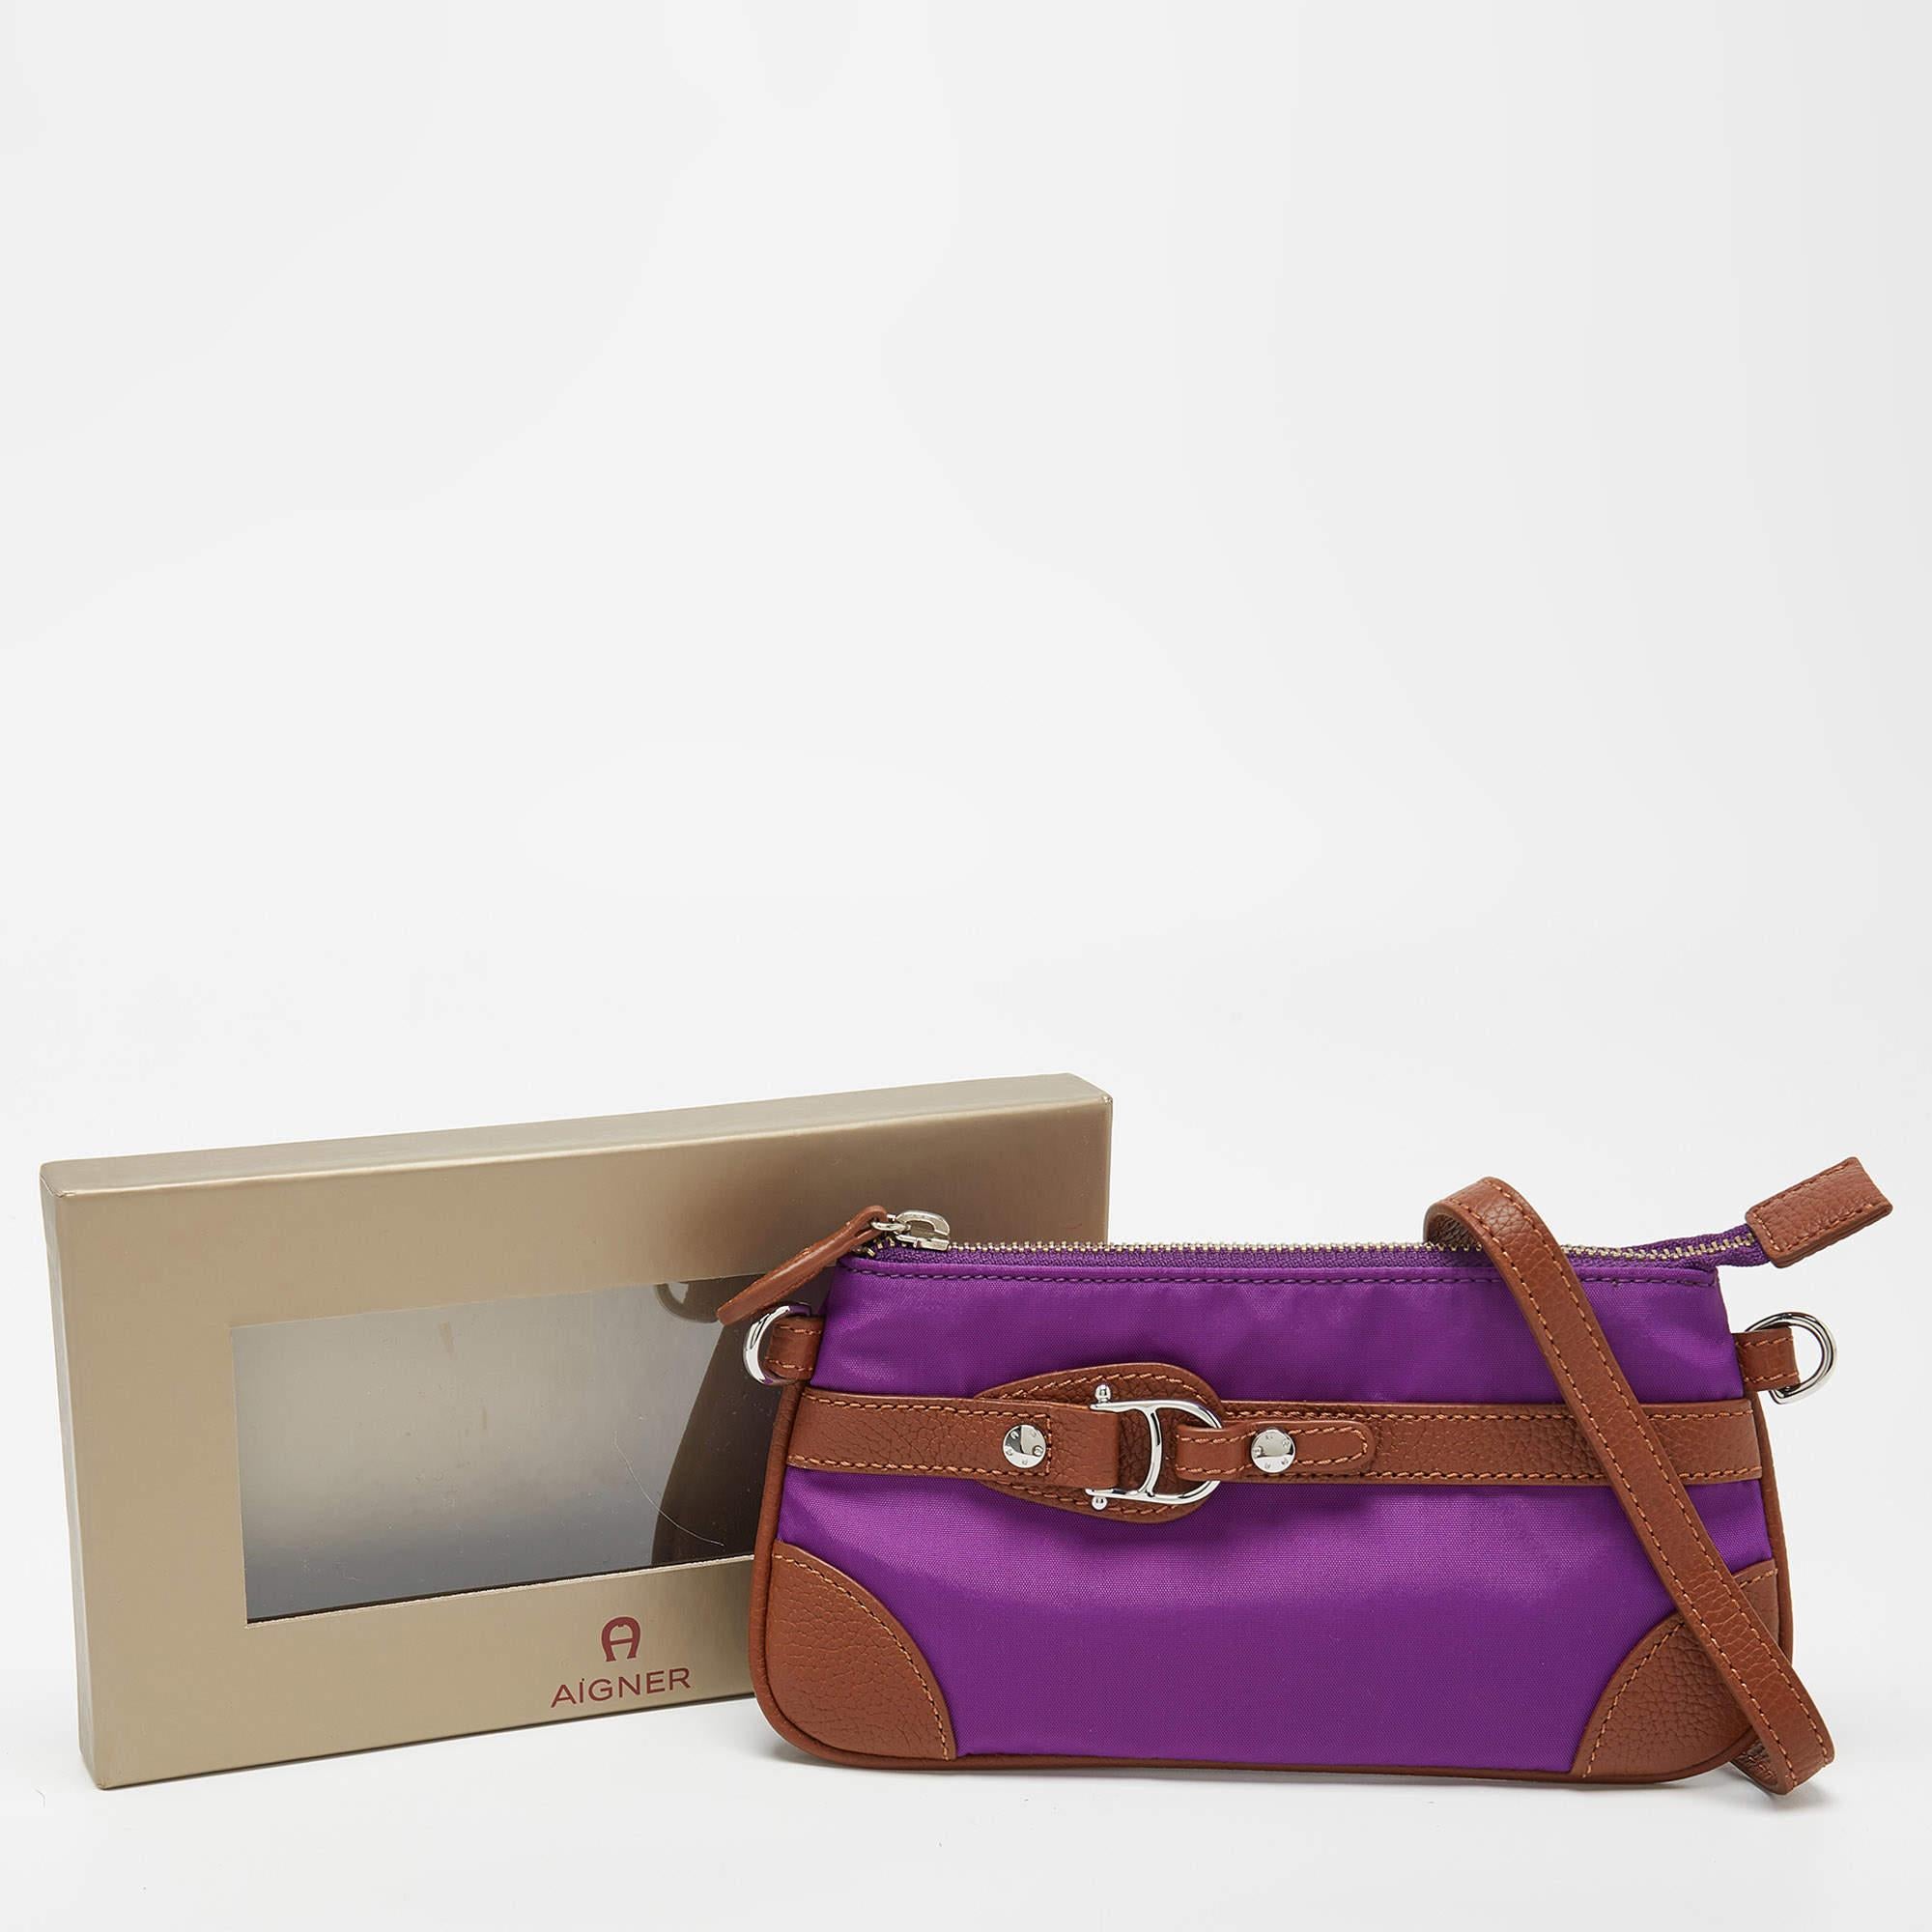 Aigner Purple/Brown Nylon and Leather Buckle Clutch Bag For Sale 2